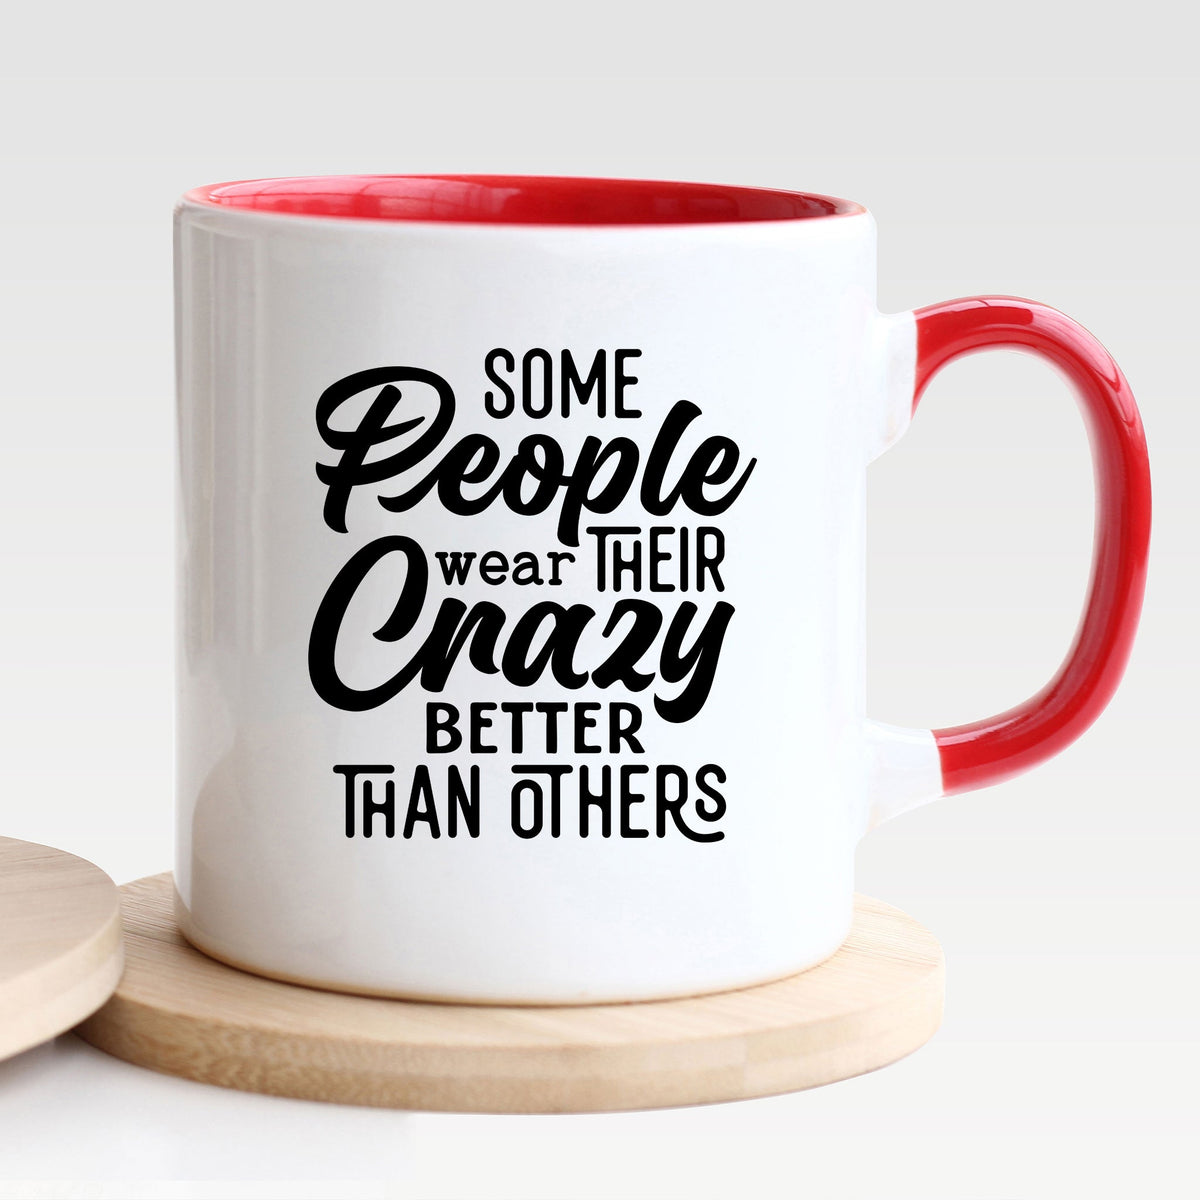 Some People Wear Their Crazy Better Than Others - Mug